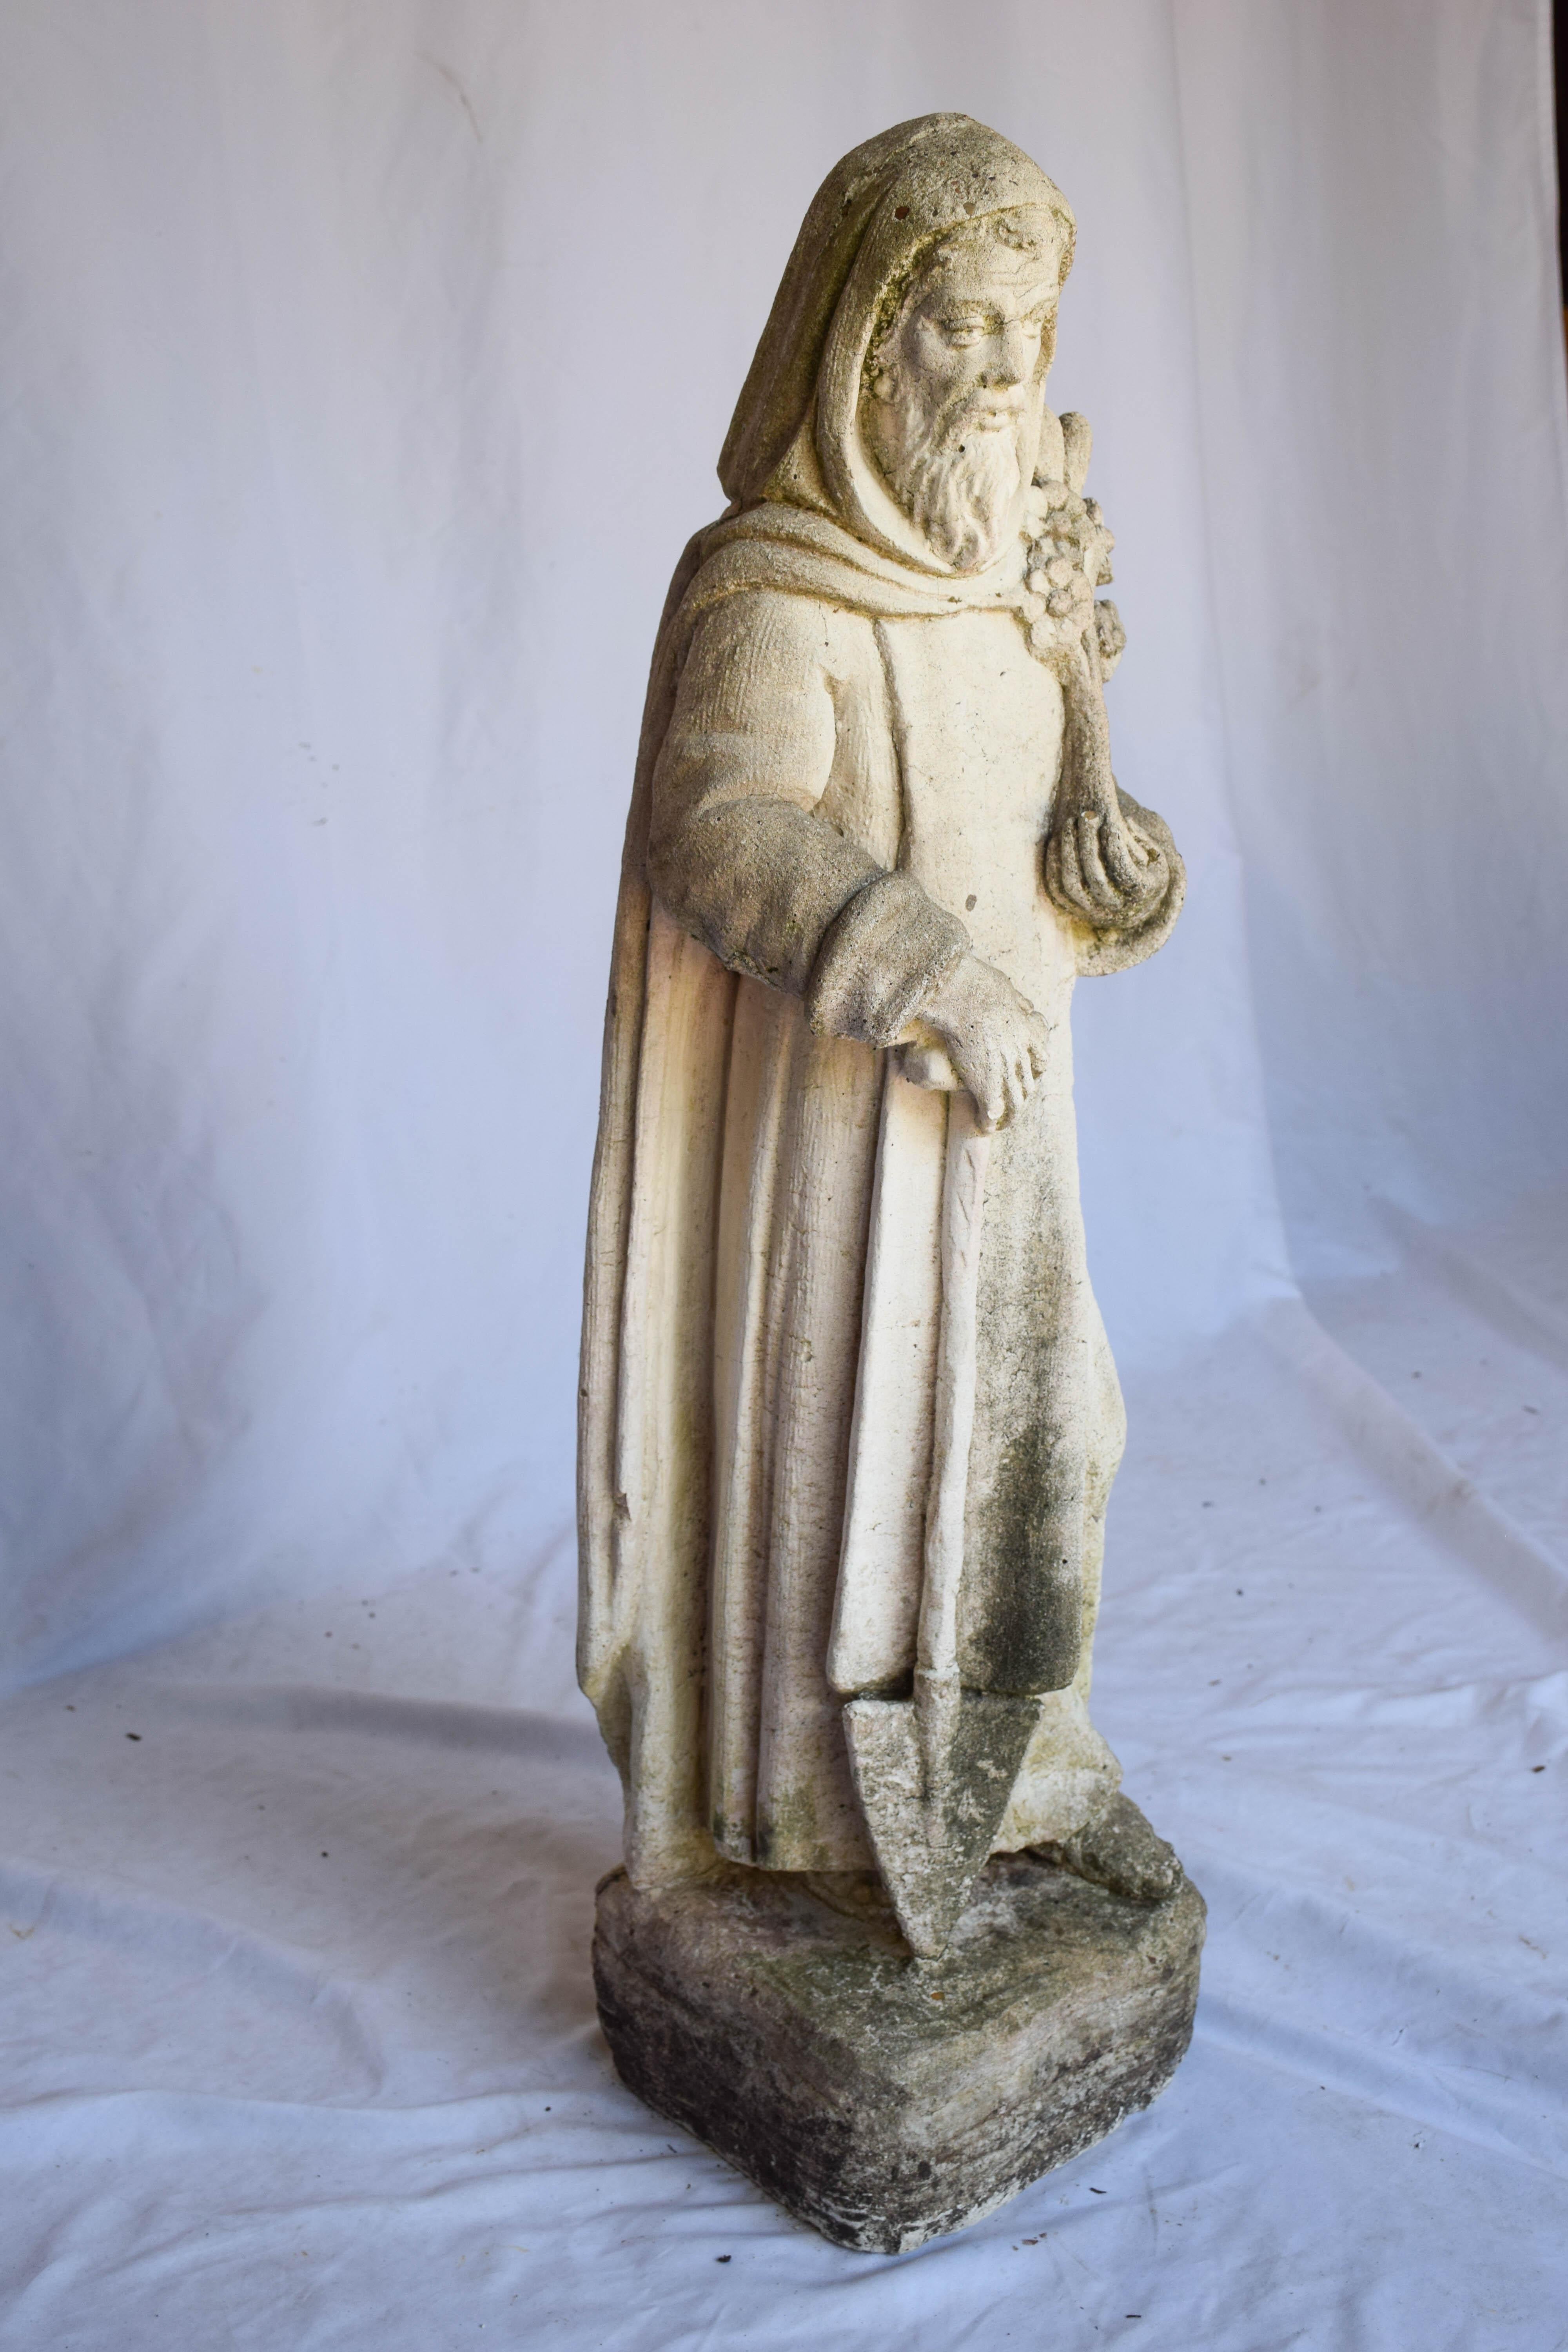 This vintage concrete statue of Saint Fiacre will look wonderful in your garden or home. Saint Fiacre of Breuil was a Catholic priest and gardener of the seventh century. He emigrated from his native Ireland to France, where he built a vegetable and